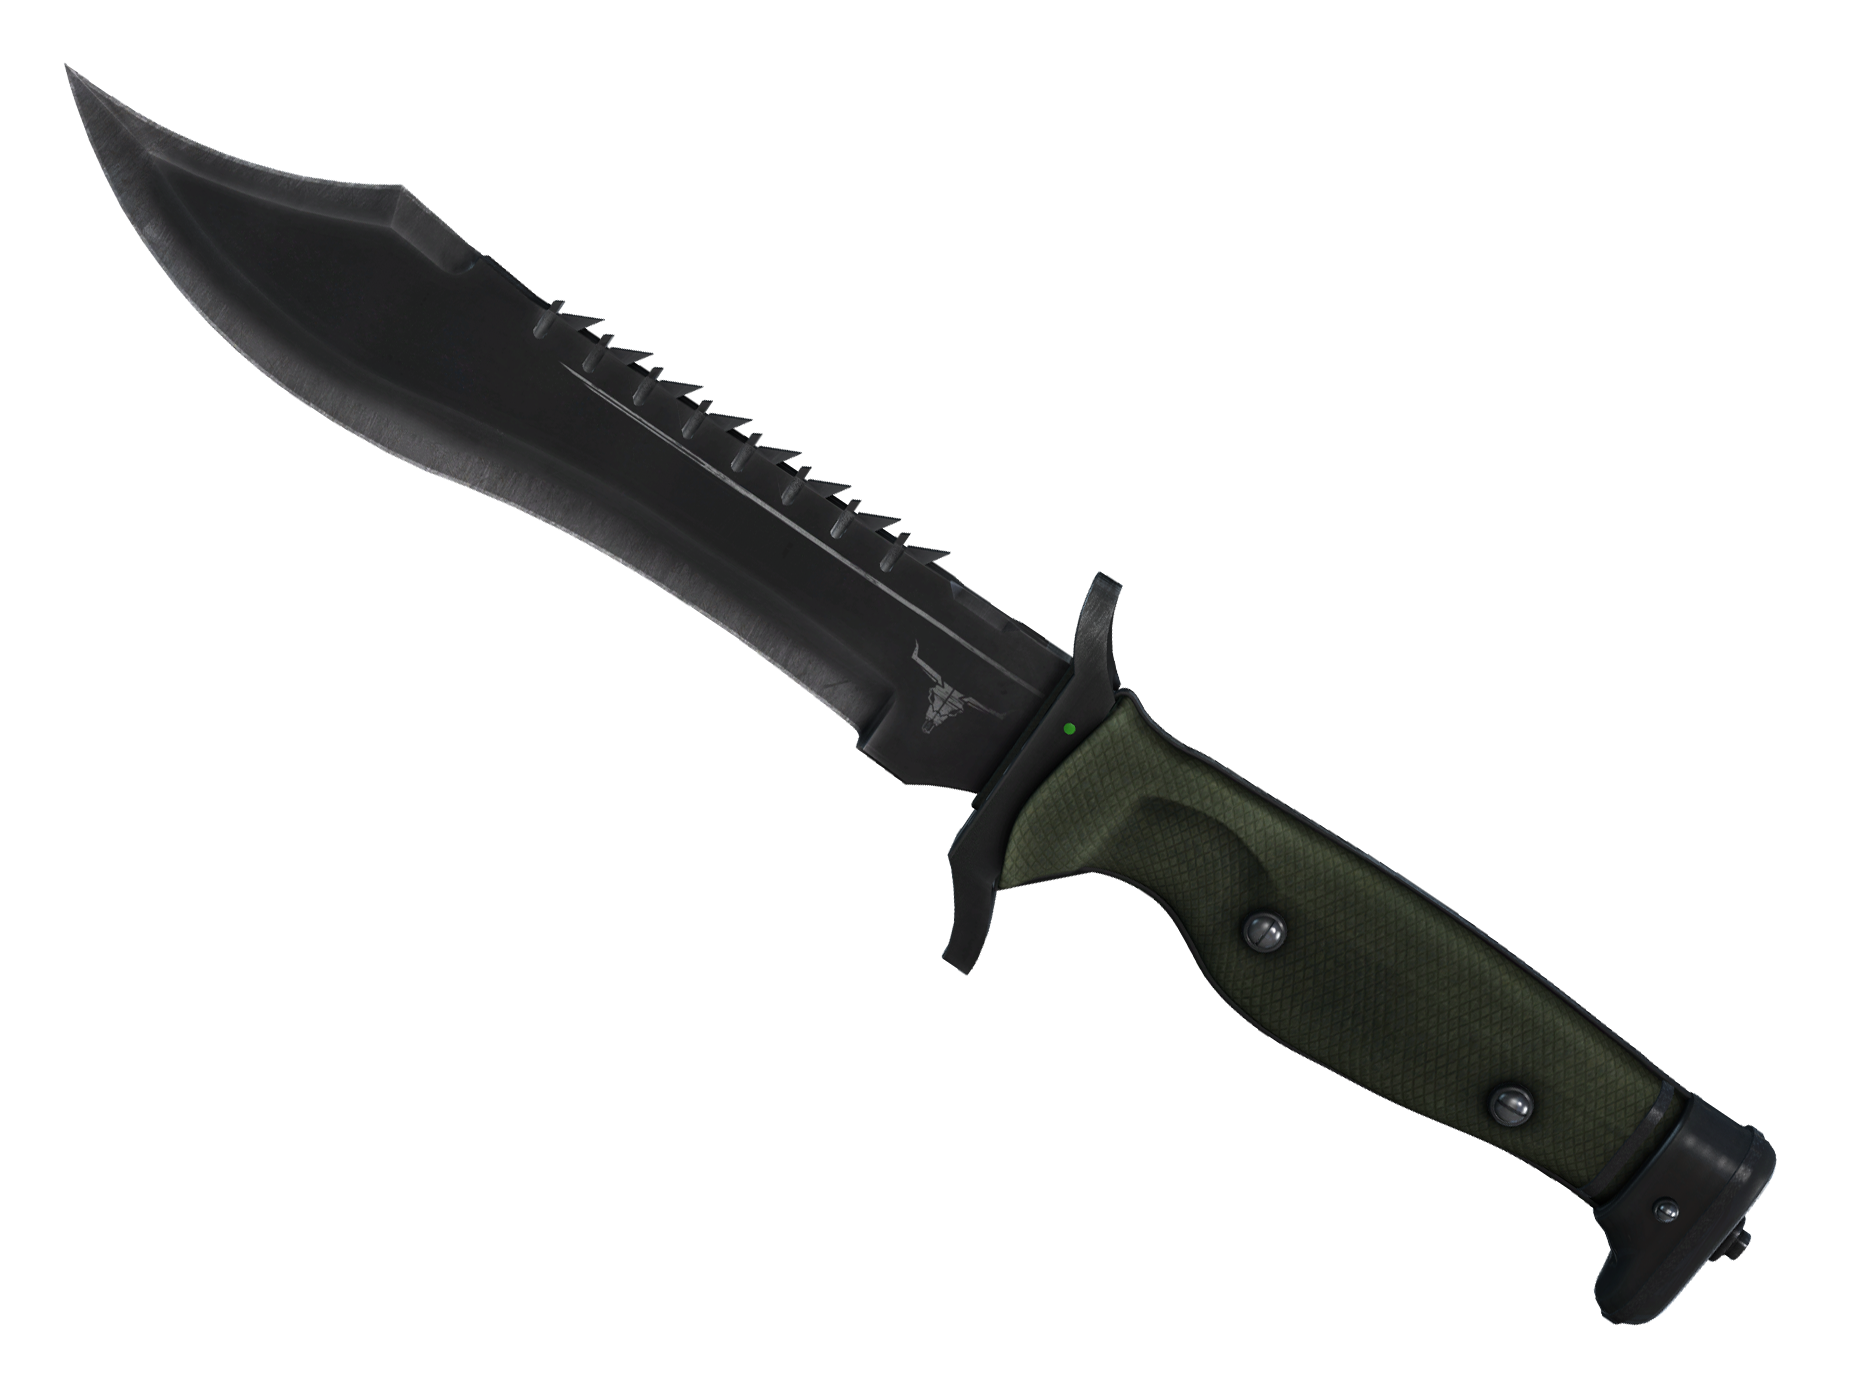 Bowie Knife ★ Large Rendering